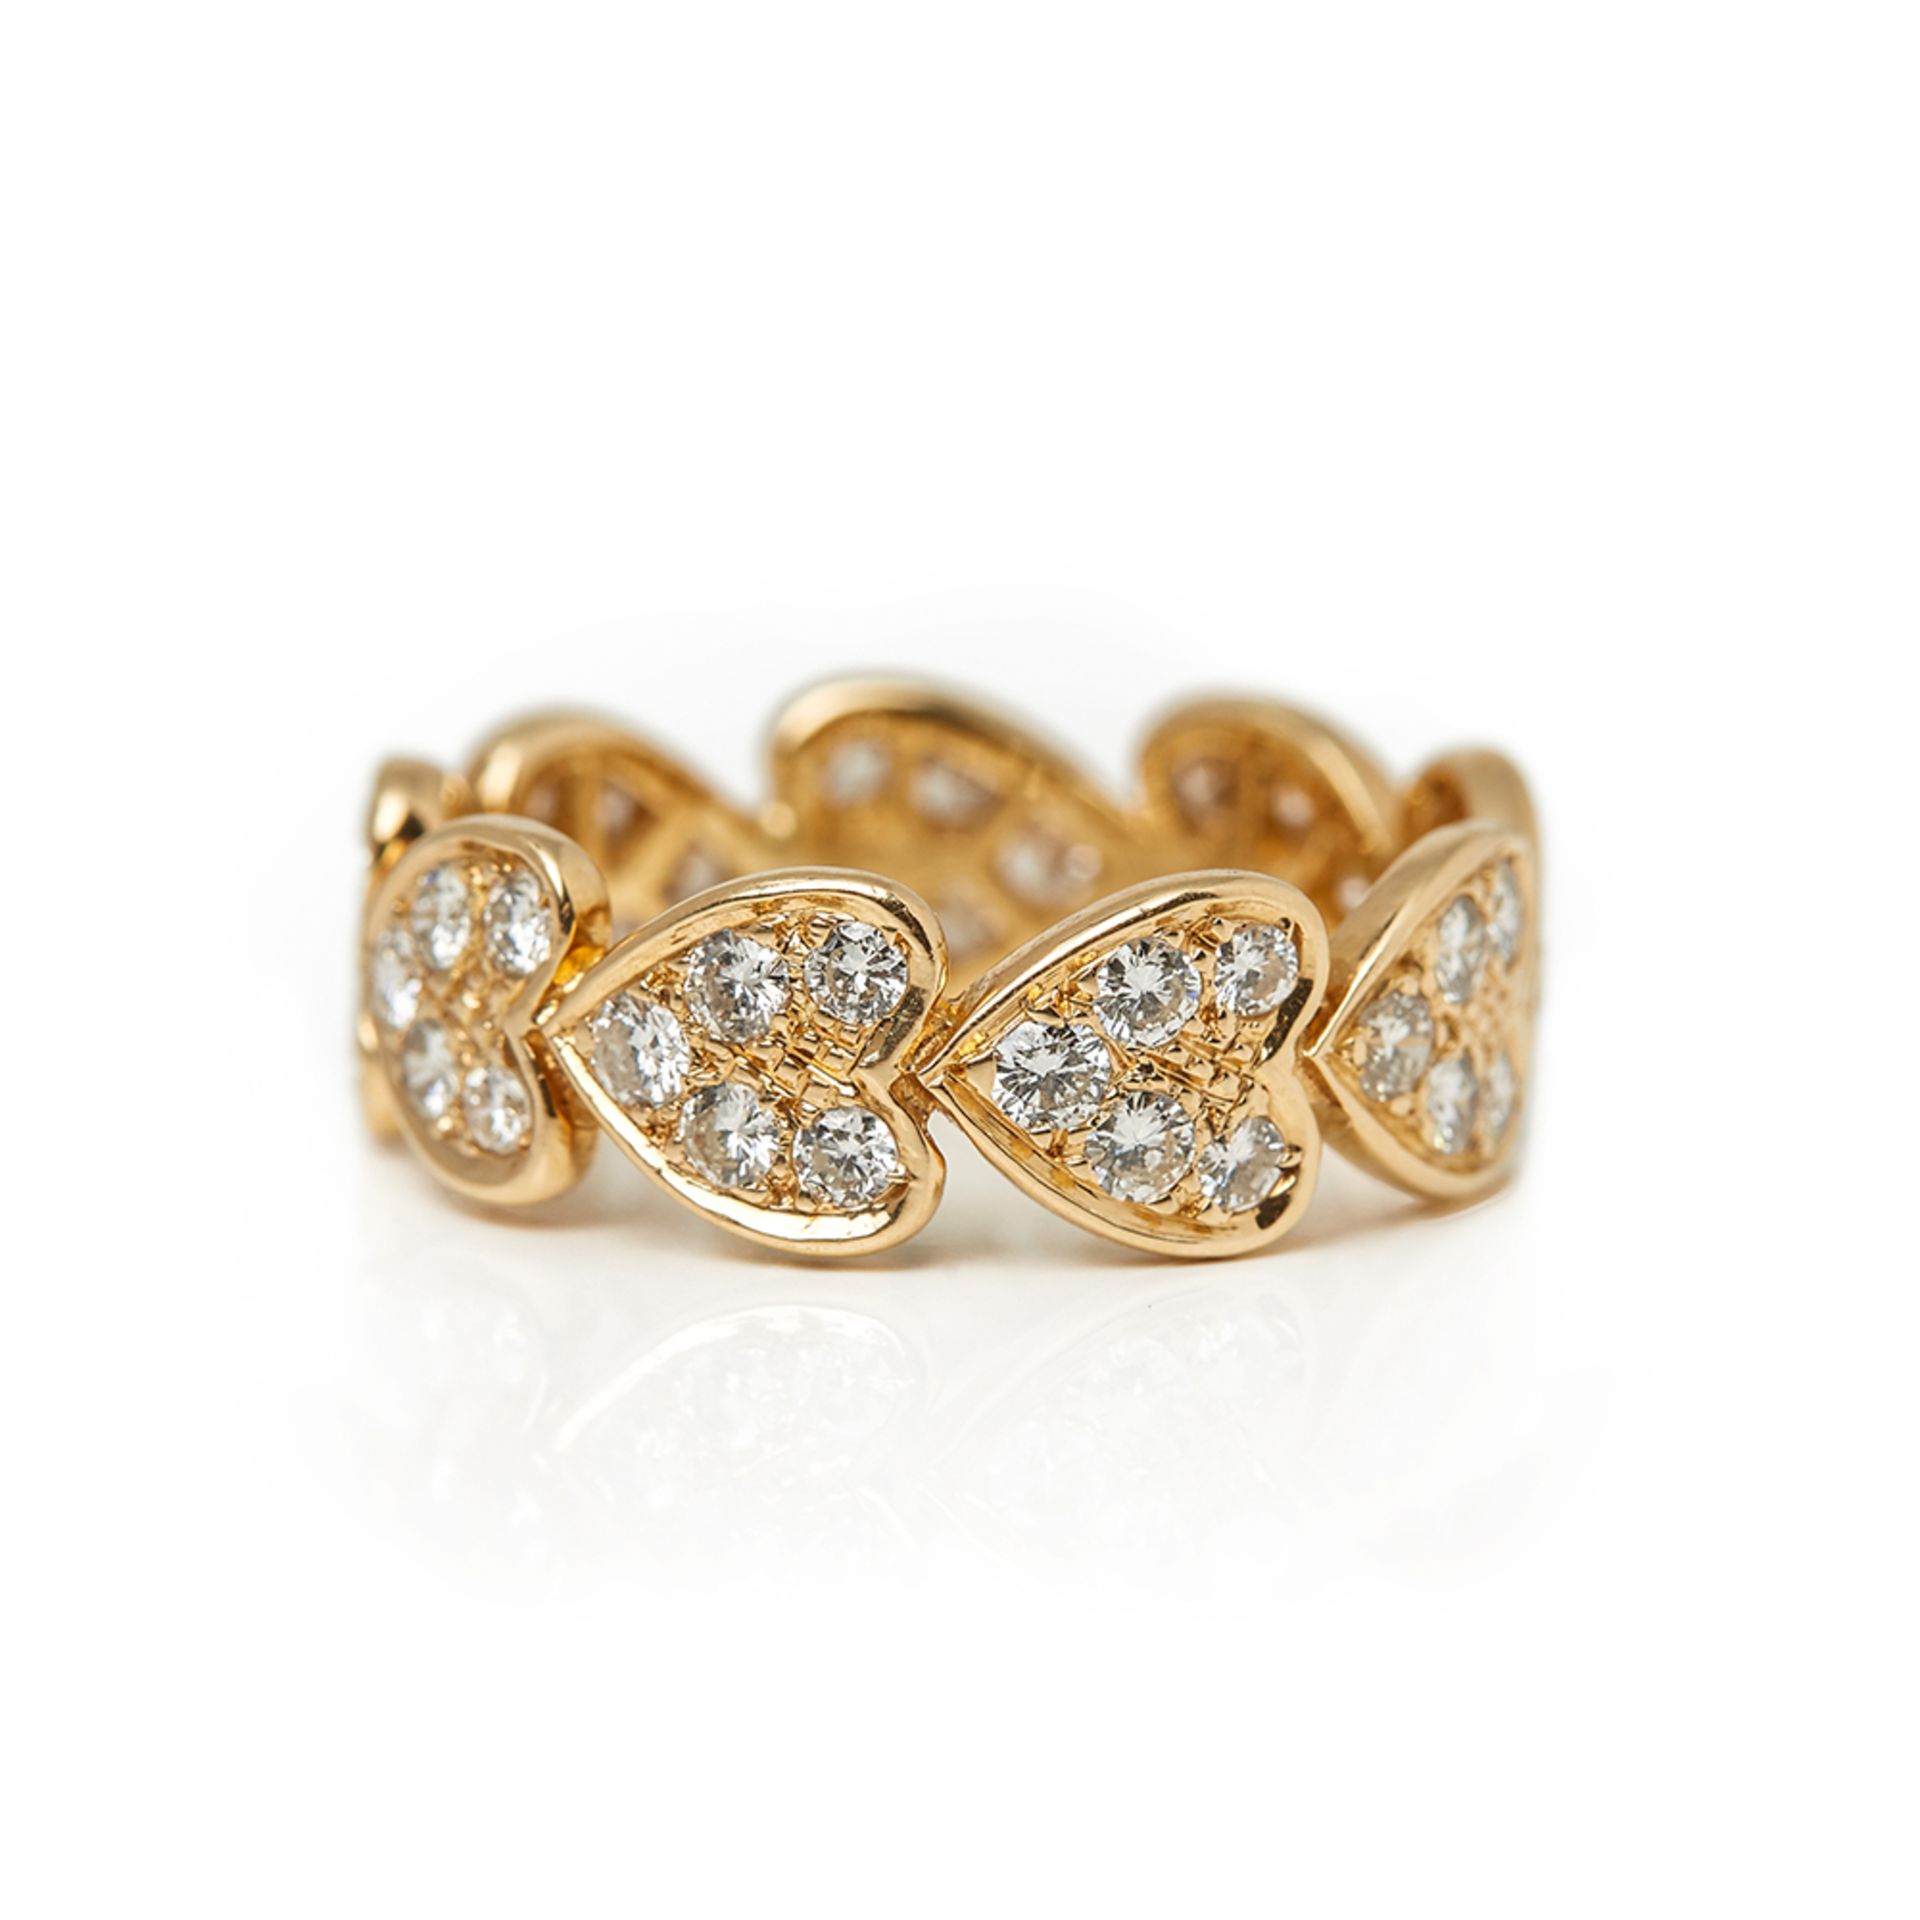 Cartier 18k Yellow Gold Diamond Heart Design Band Ring - Image 9 of 9